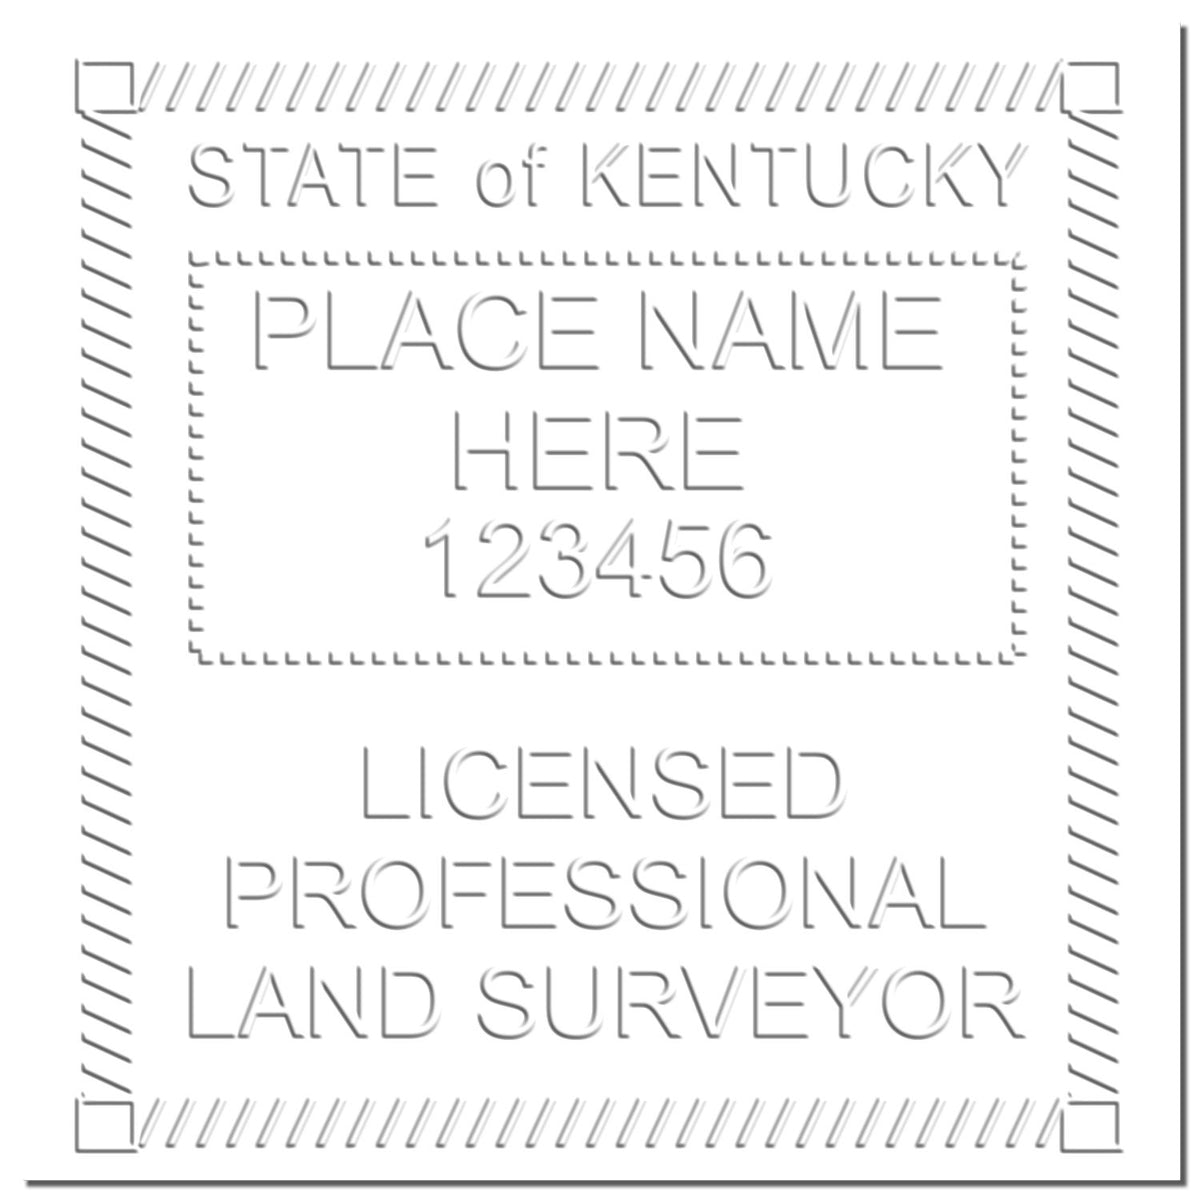 This paper is stamped with a sample imprint of the Handheld Kentucky Land Surveyor Seal, signifying its quality and reliability.